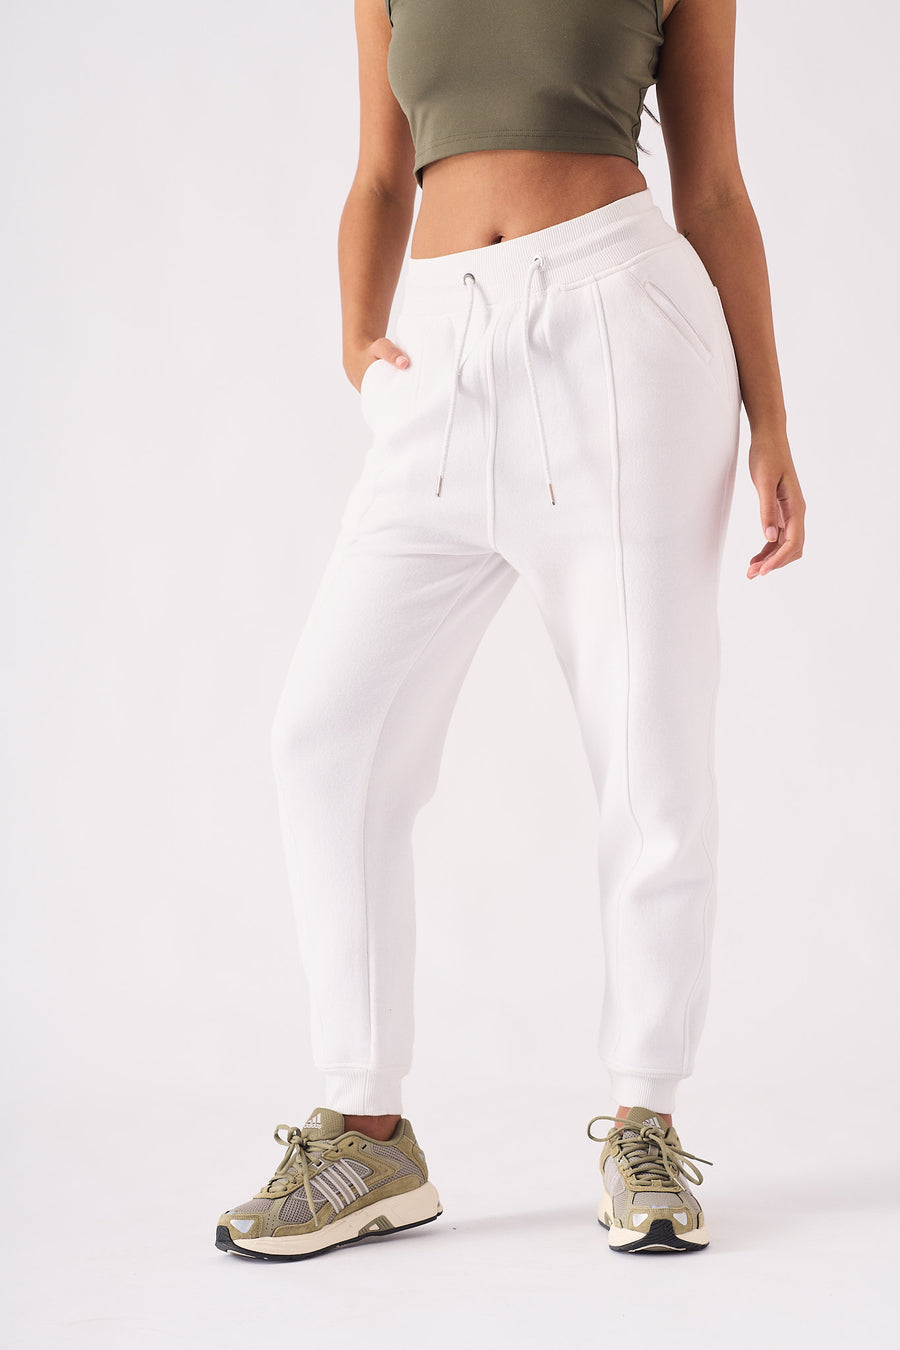 Buy Athleisure Straight Joggers in White - Jmojo